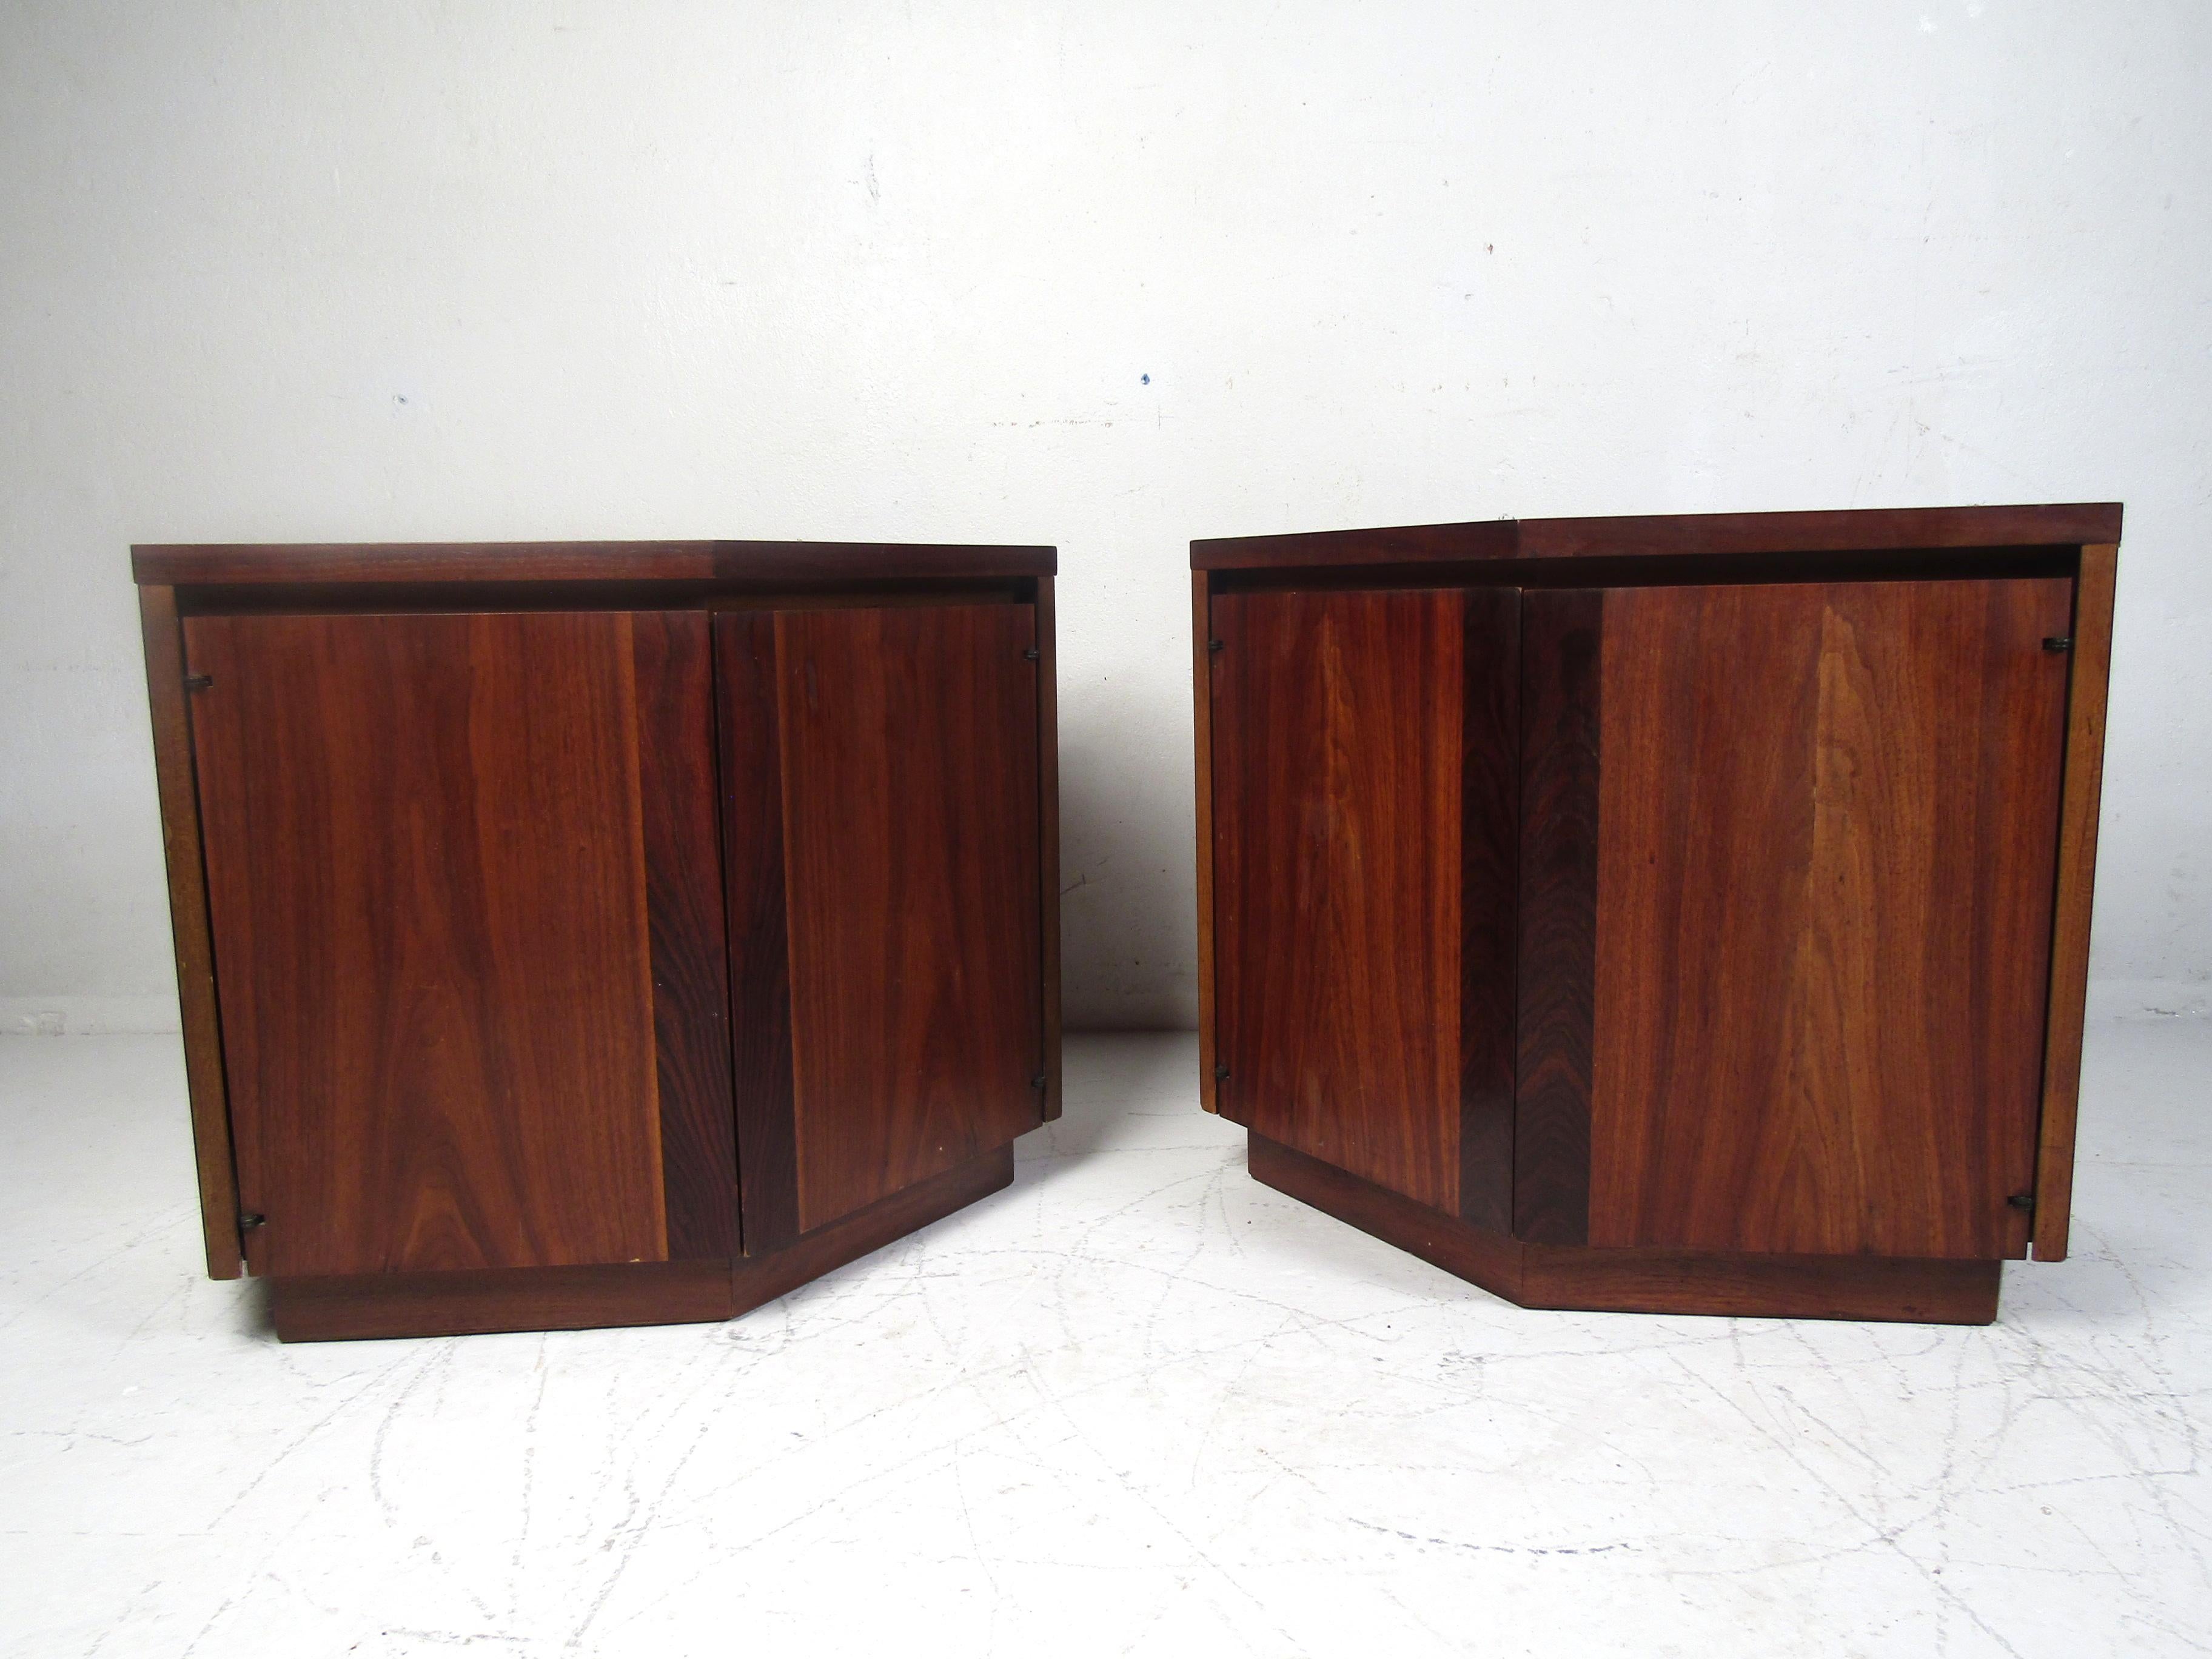 Beautiful pair of midcentury nightstands with a combination of walnut and rosewood veneers covering the case. Unusual construction with an angled front-end. This pair is sure to prove a nice addition to any modern interior. Please confirm item